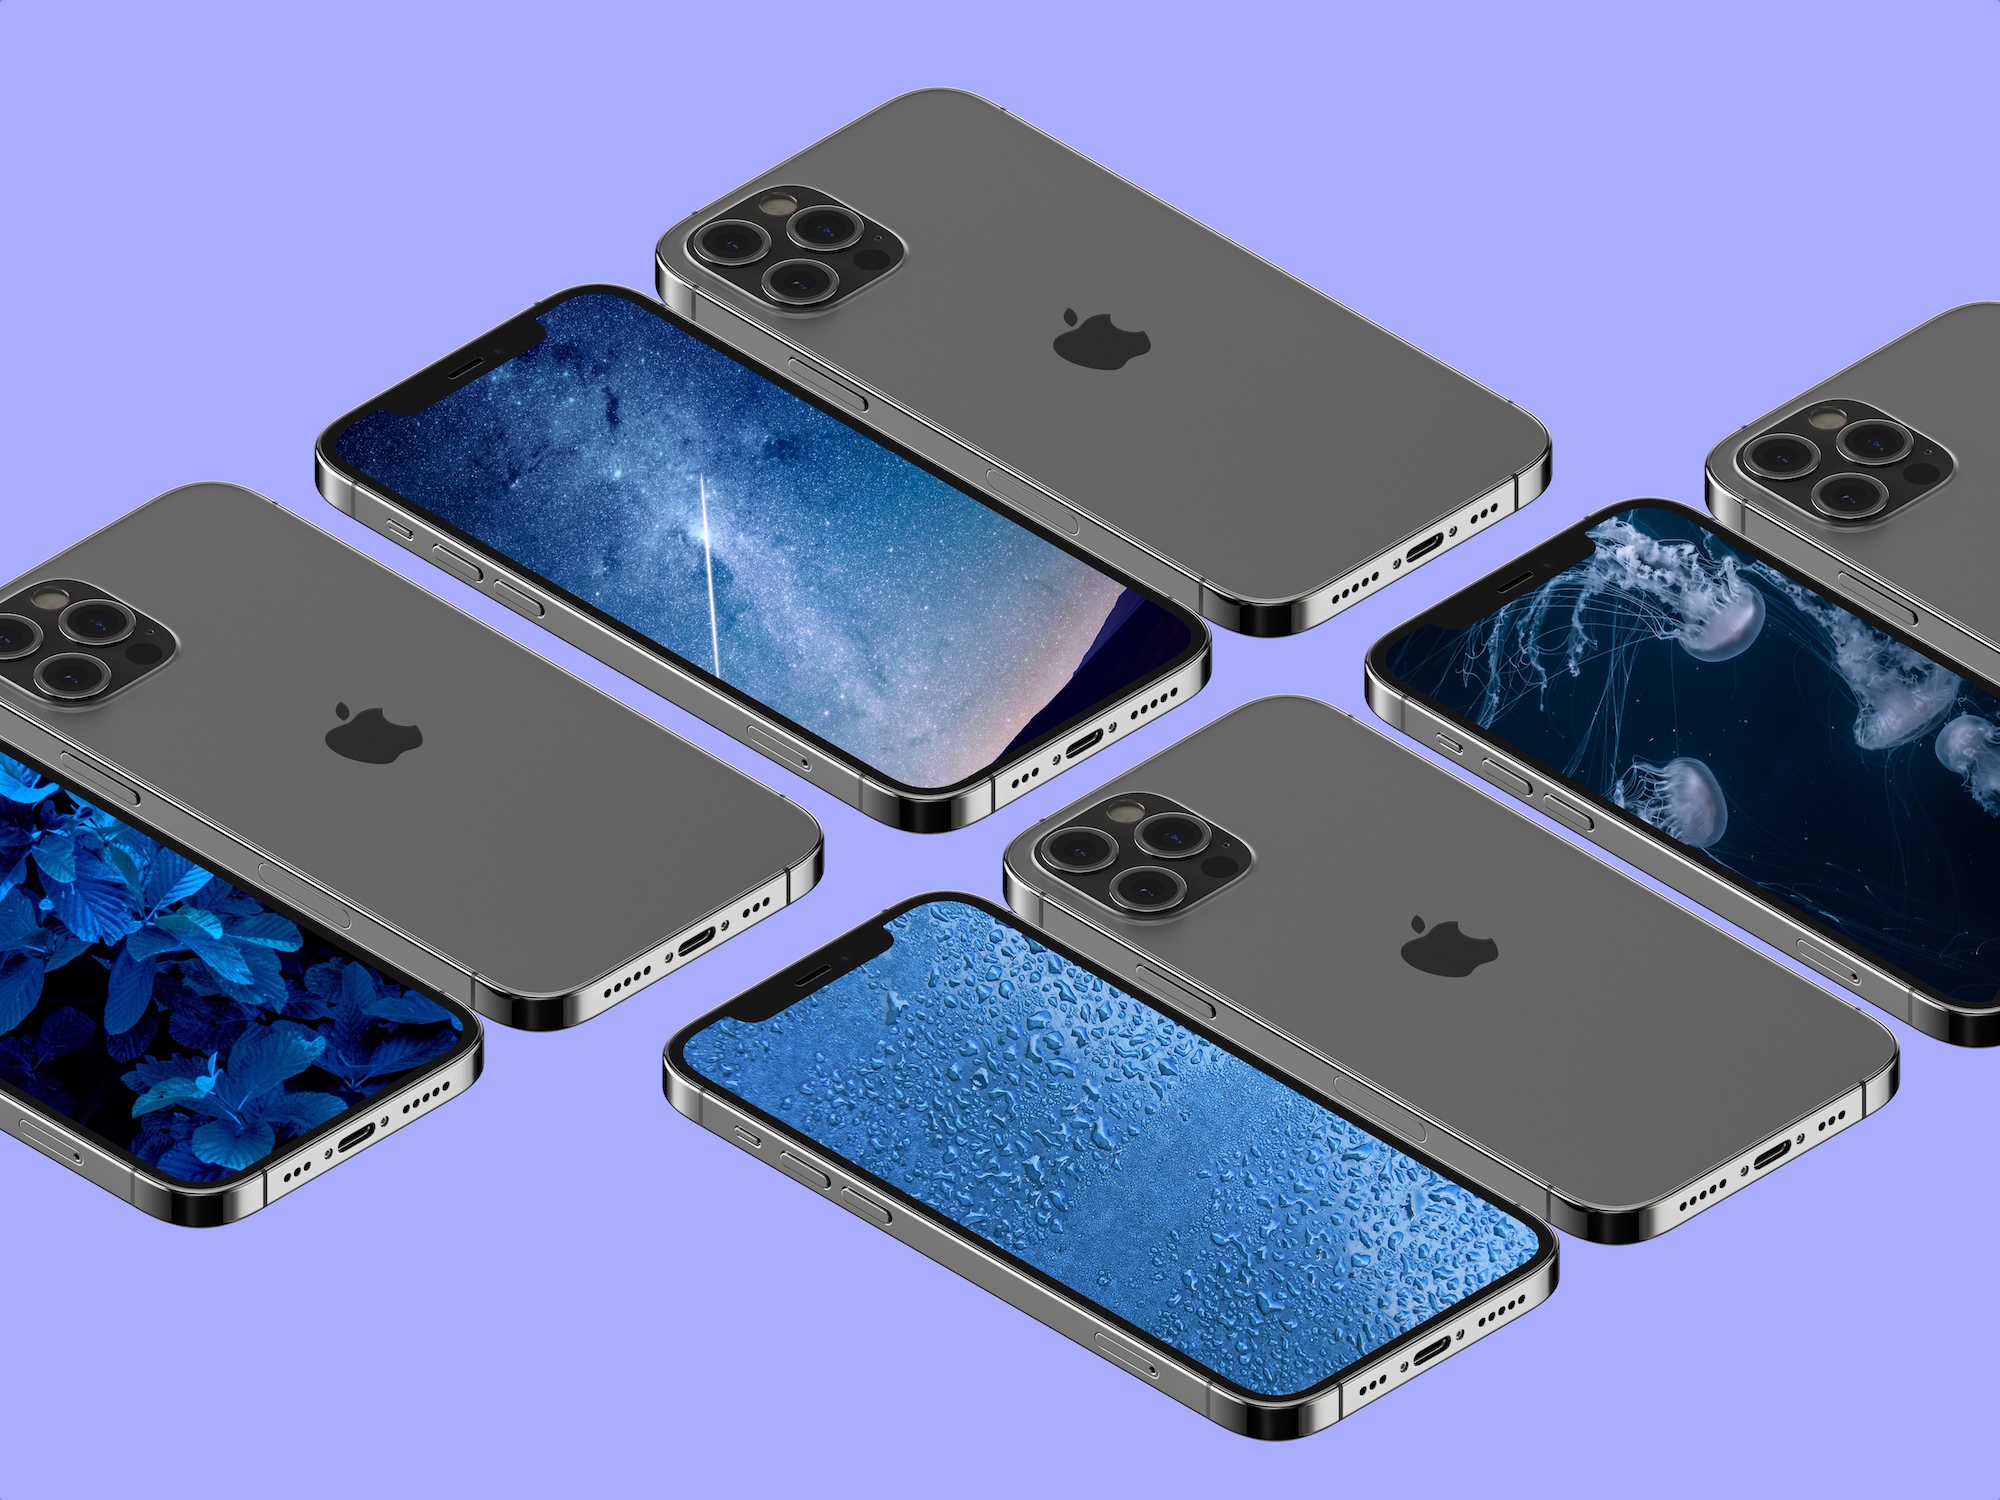 Download these blue wallpapers for iPhone iPad and Mac